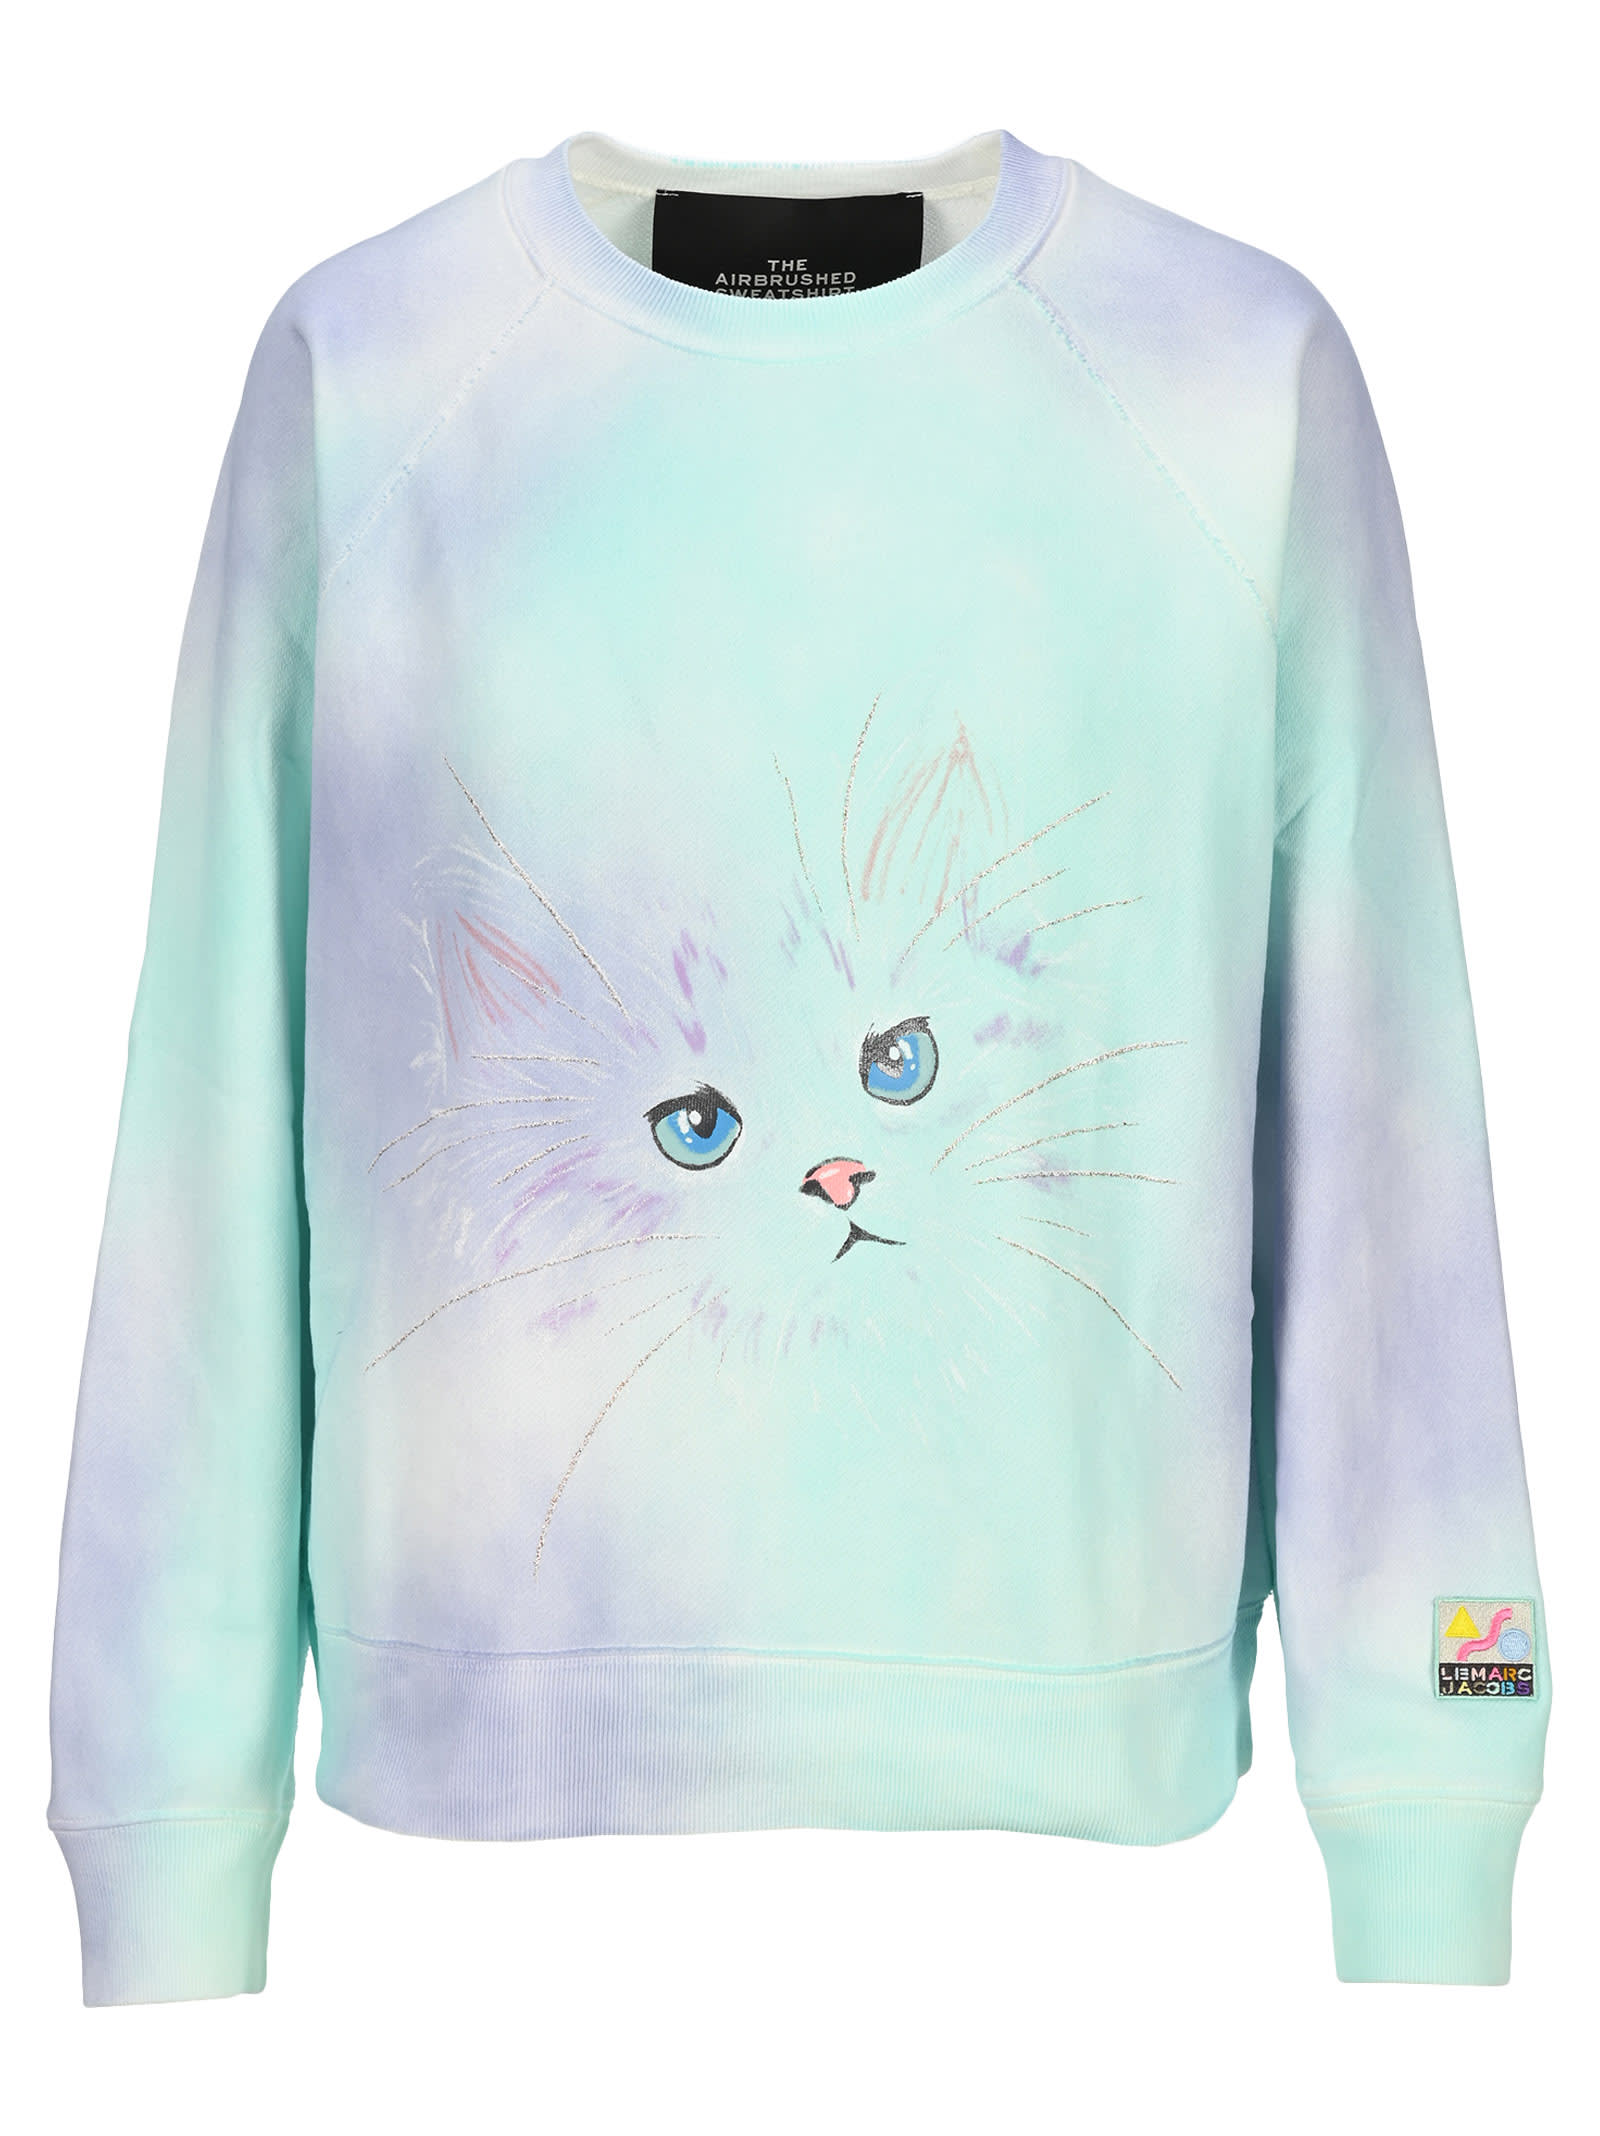 MARC JACOBS THE AIRBRUSHED SWEATSHIRT,11217078